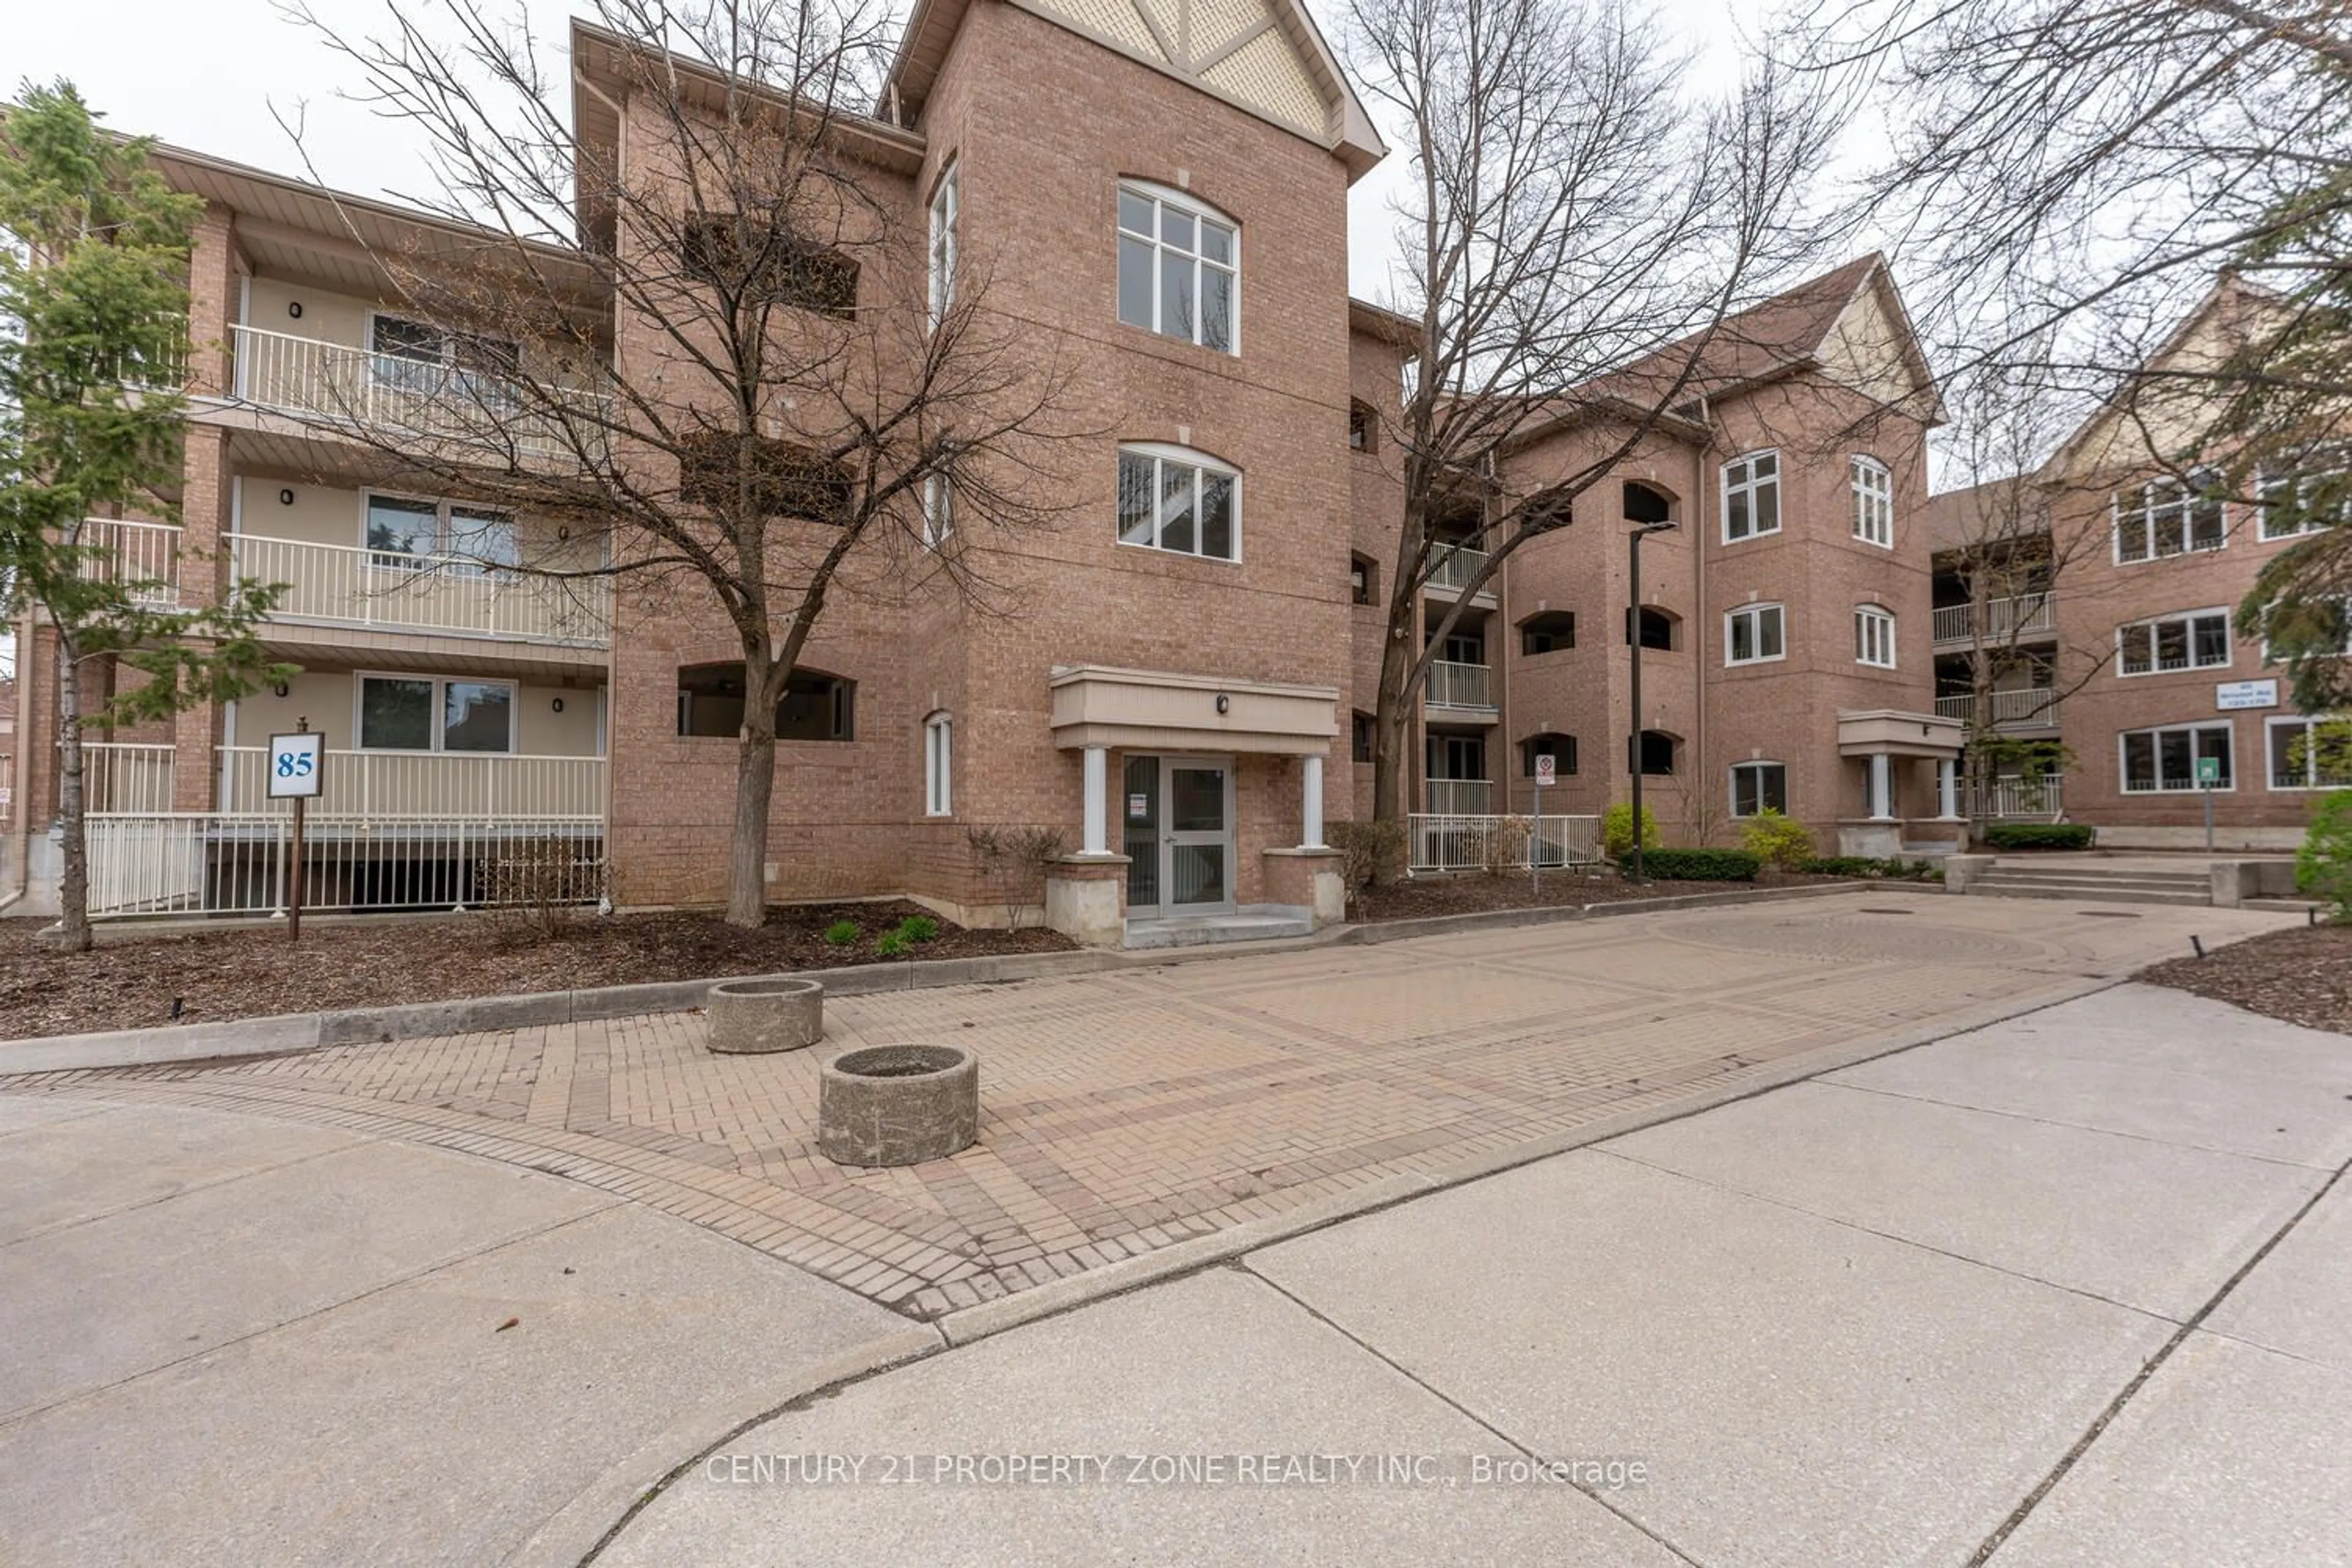 A pic from exterior of the house or condo for 85 Bristol Rd #139, Mississauga Ontario L4Z 3N8